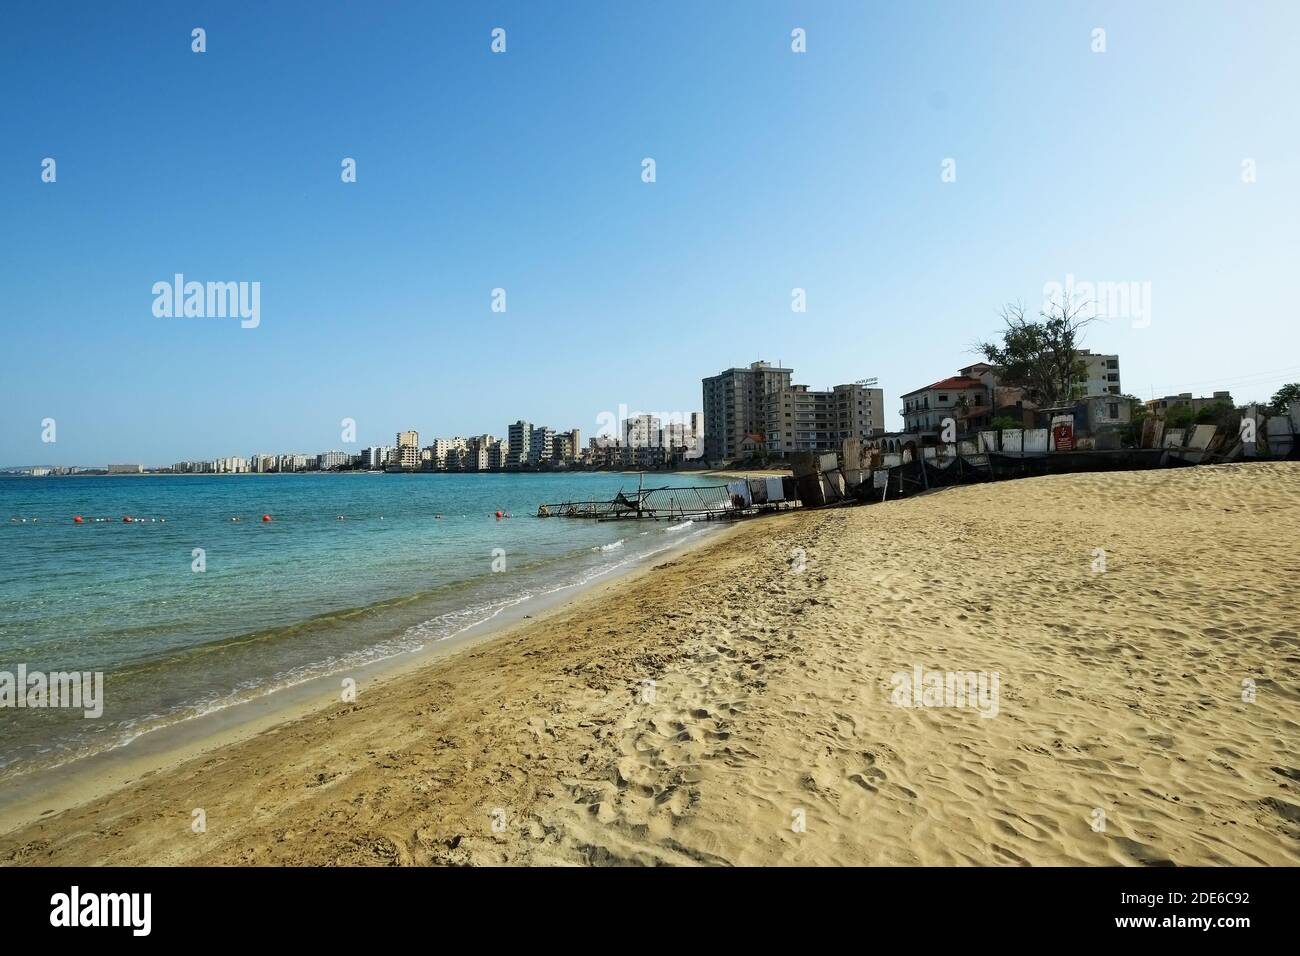 Cyprus. Varosha, Famagusta.The former holiday resort was abandoned in 1974 and is now part of Turkish occupied Northern Cyprus, (TRNC). Stock Photo